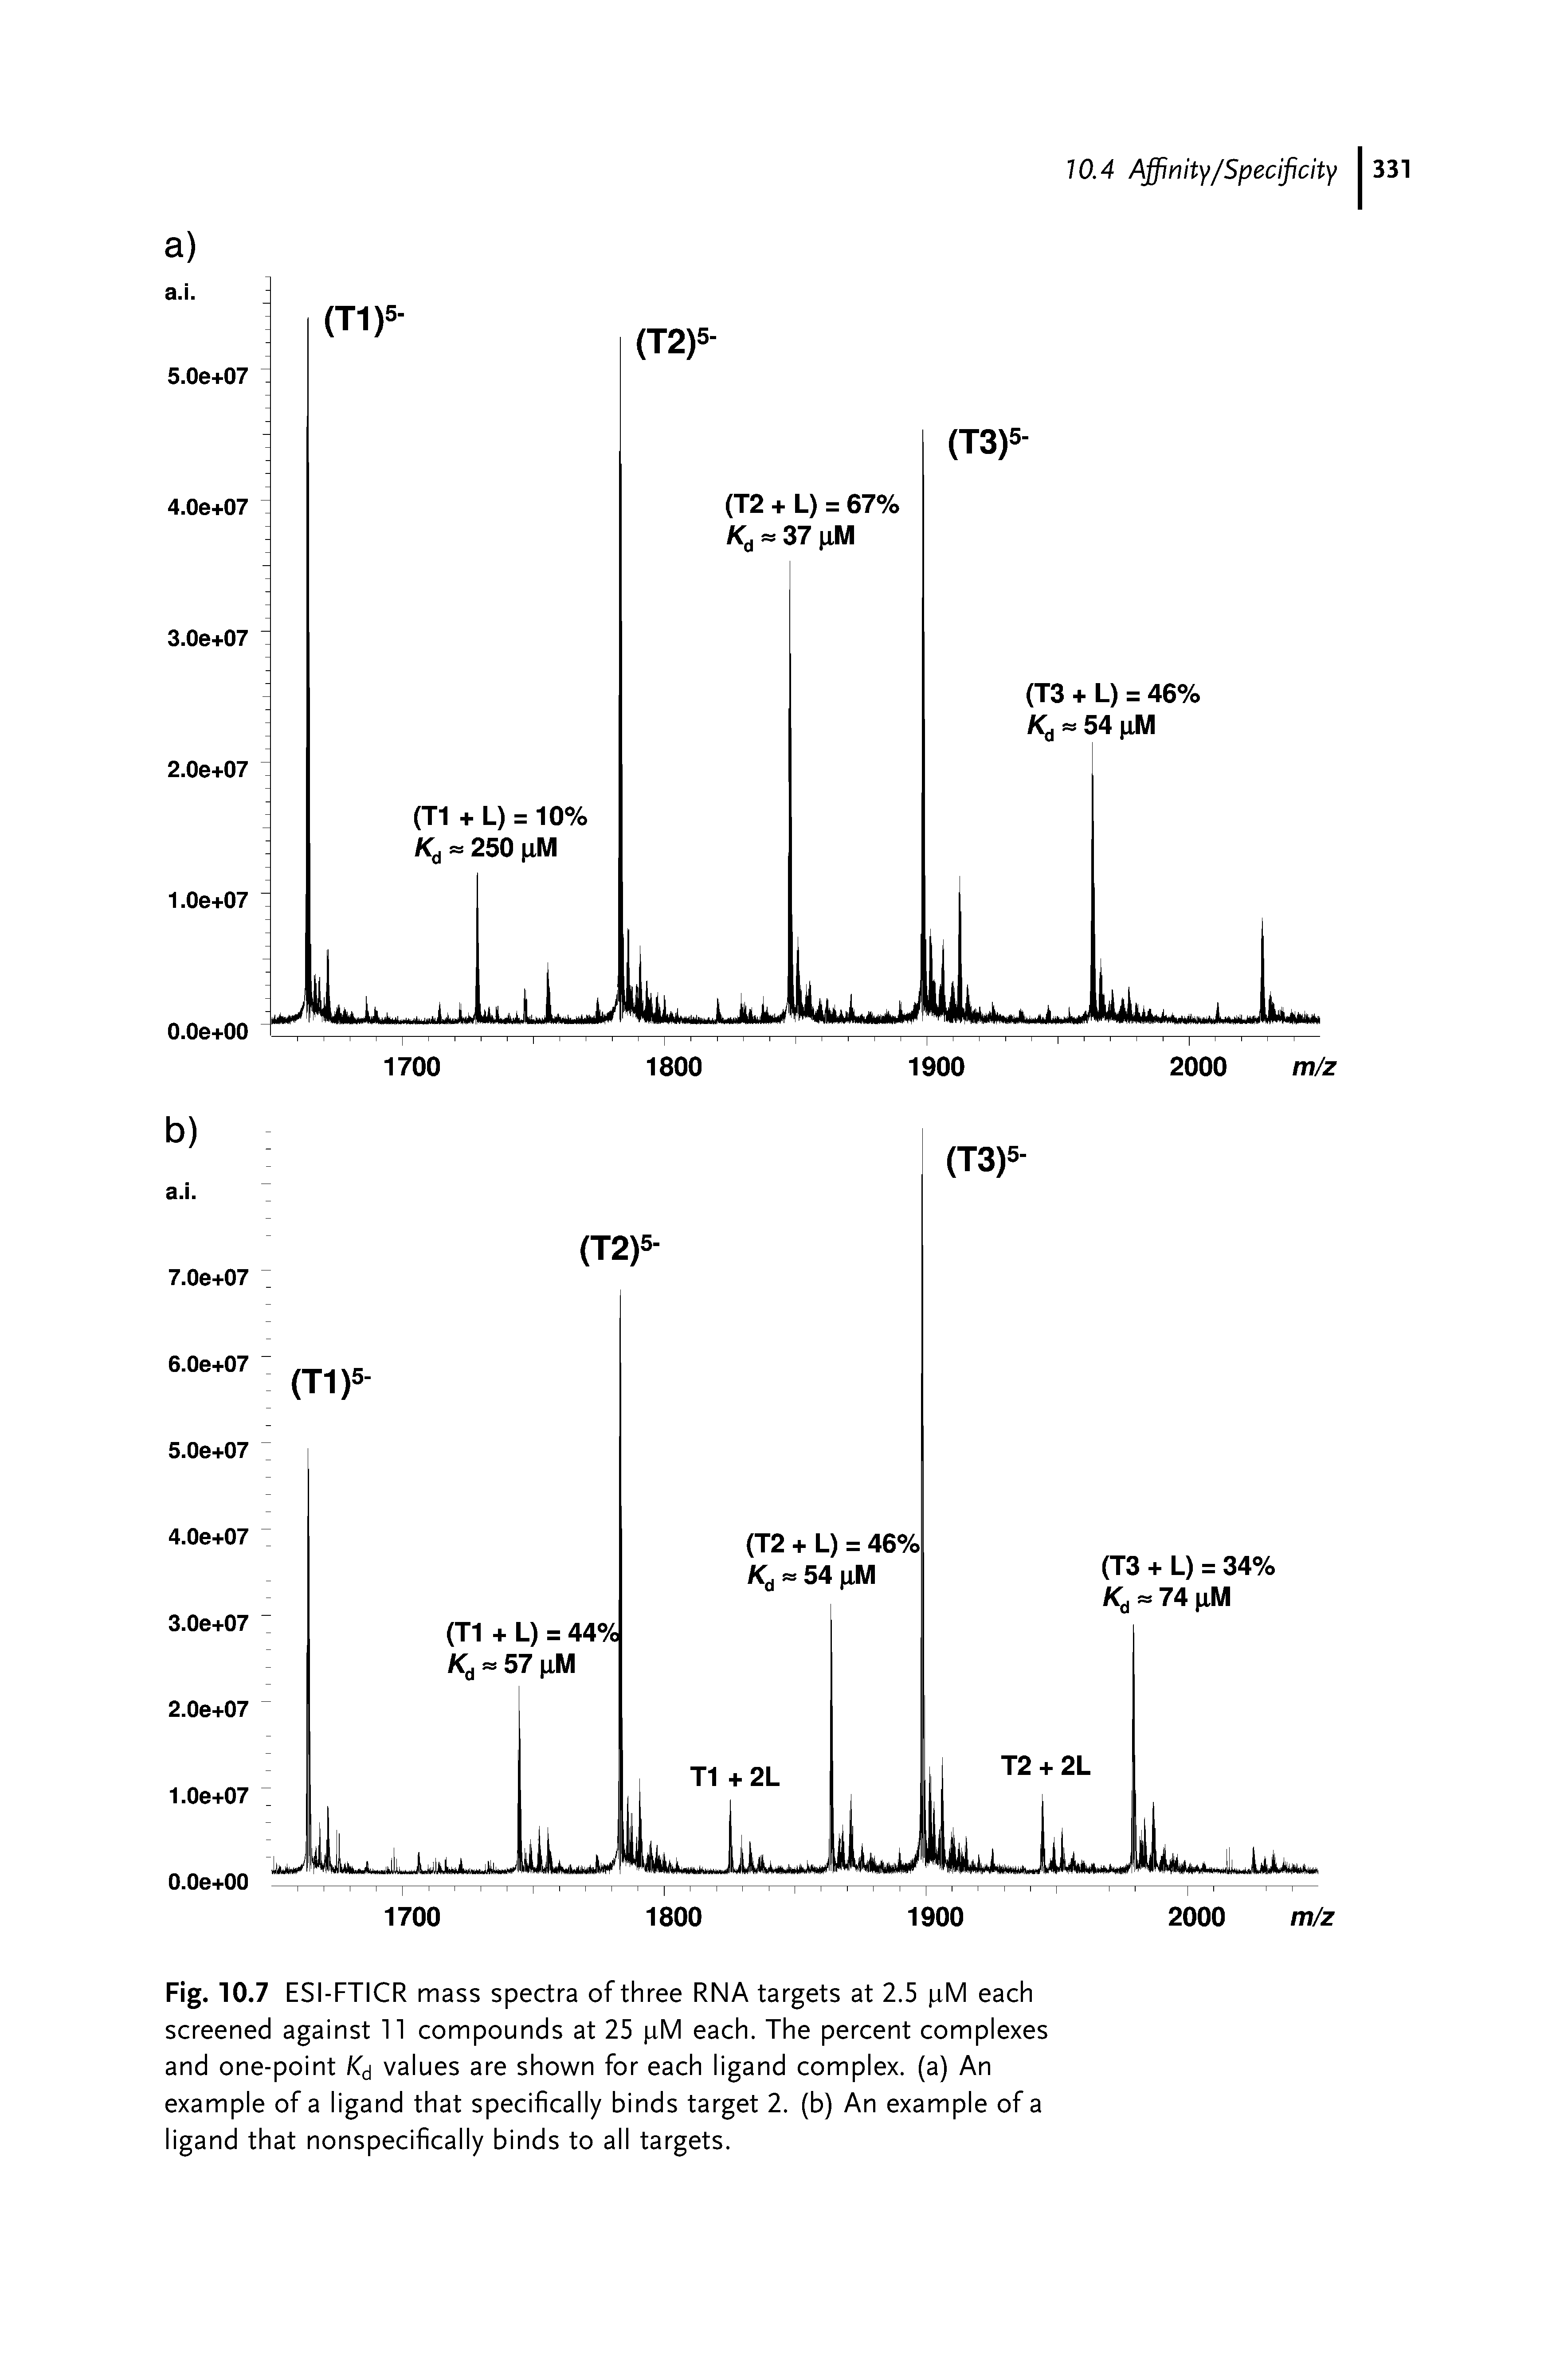 Fig. 10.7 ESI-FTICR mass spectra of three RNA targets at 2.5 pM each screened against 11 compounds at 25 pM each. The percent complexes and one-point values are shown for each ligand complex, (a) An example of a ligand that specifically binds target 2. (b) An example of a ligand that nonspecifically binds to all targets.